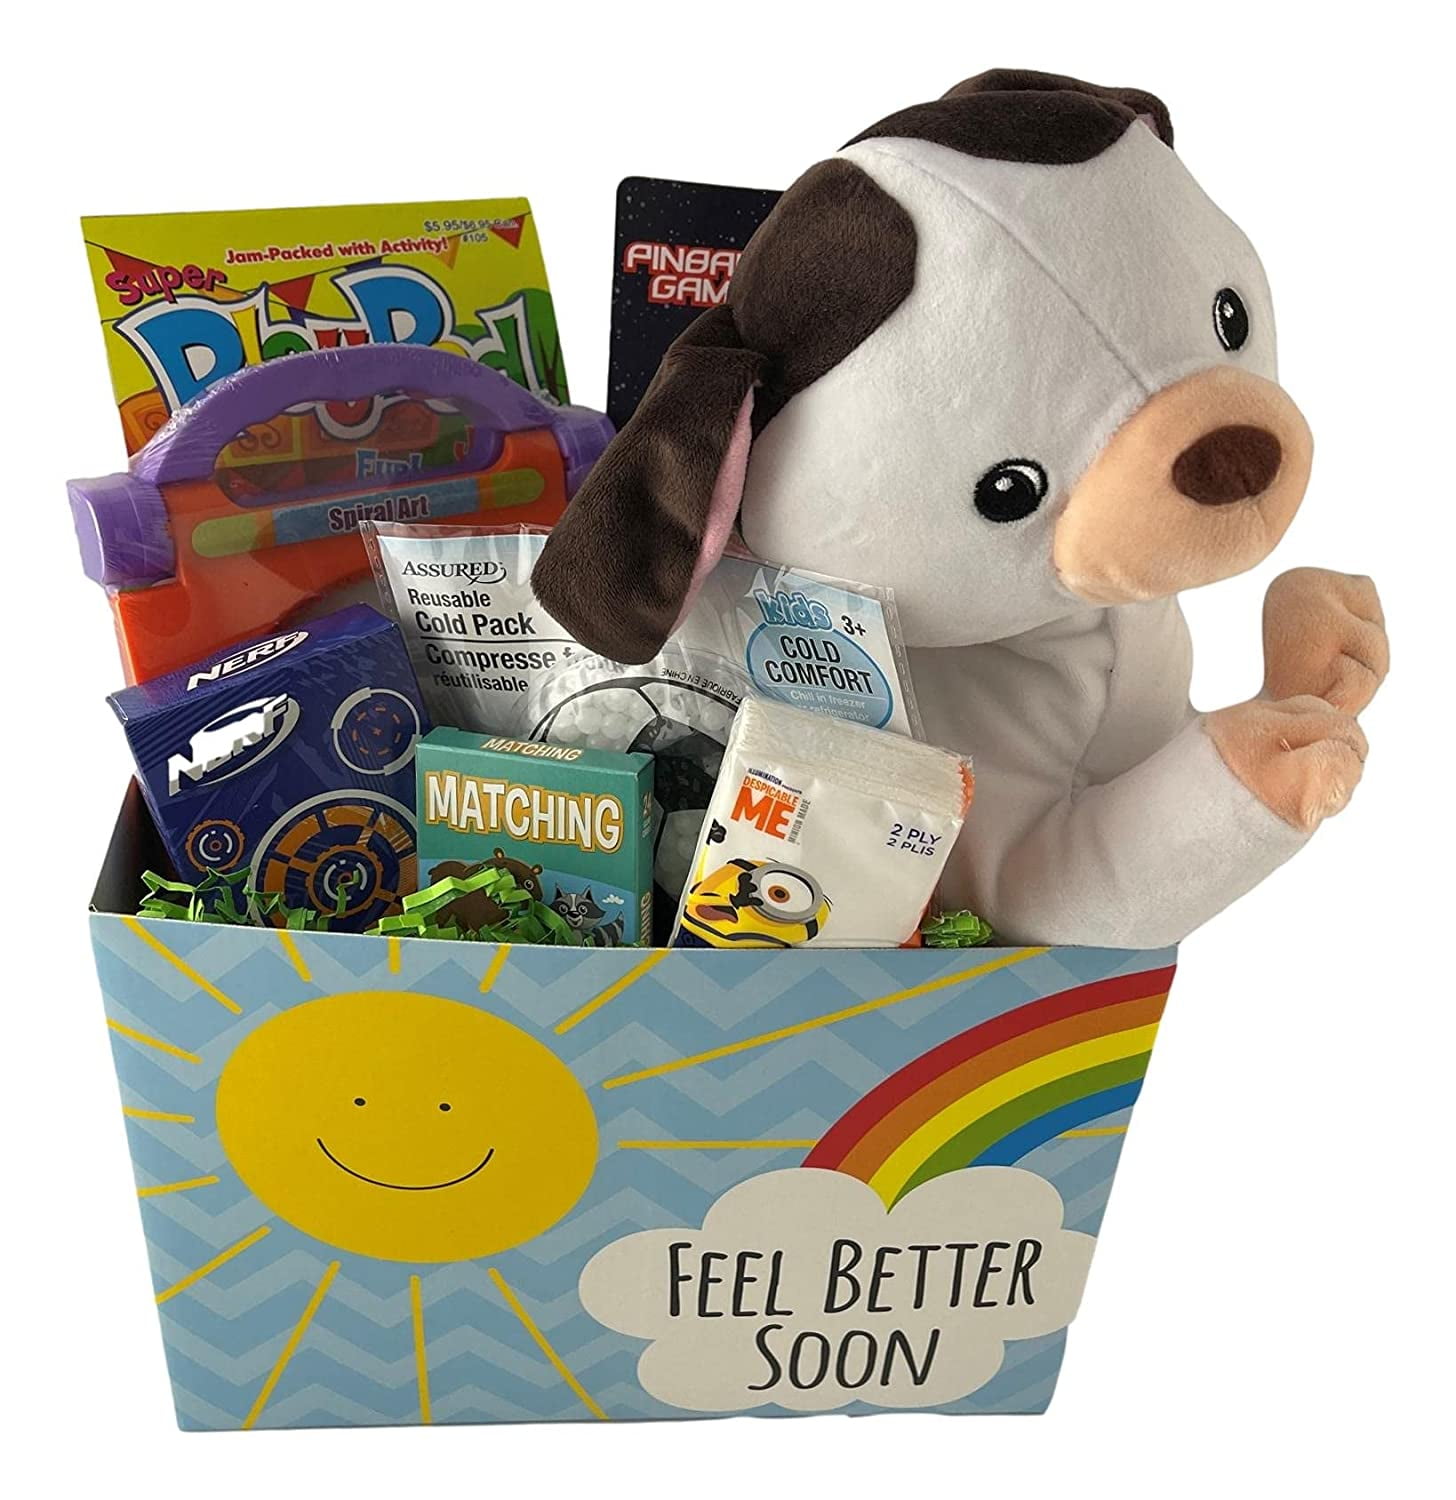 Get Well Gifts for Women After Surgery Care Package for Sick Friend Feel  Better Gifts for Kids (40ct)